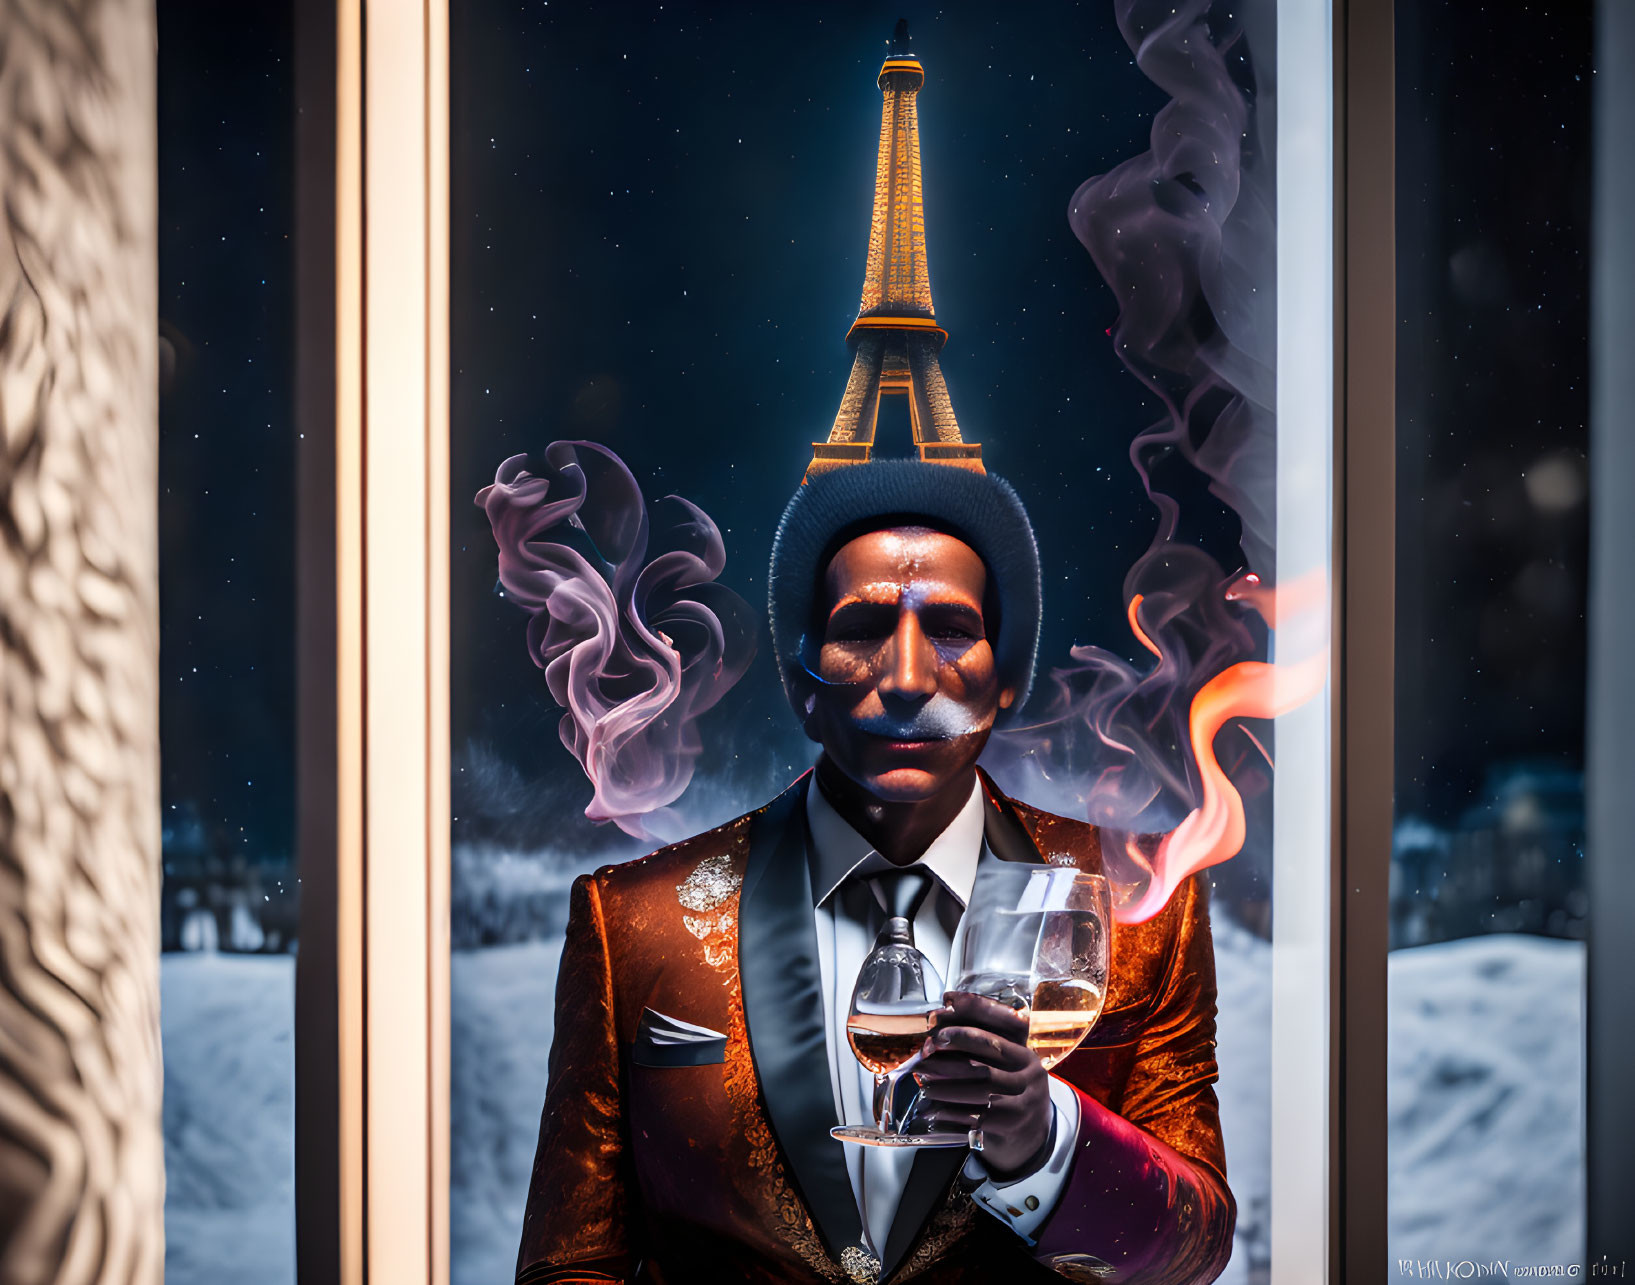 Man in stylish suit and hat with wine glass by snowy Eiffel Tower view at night.